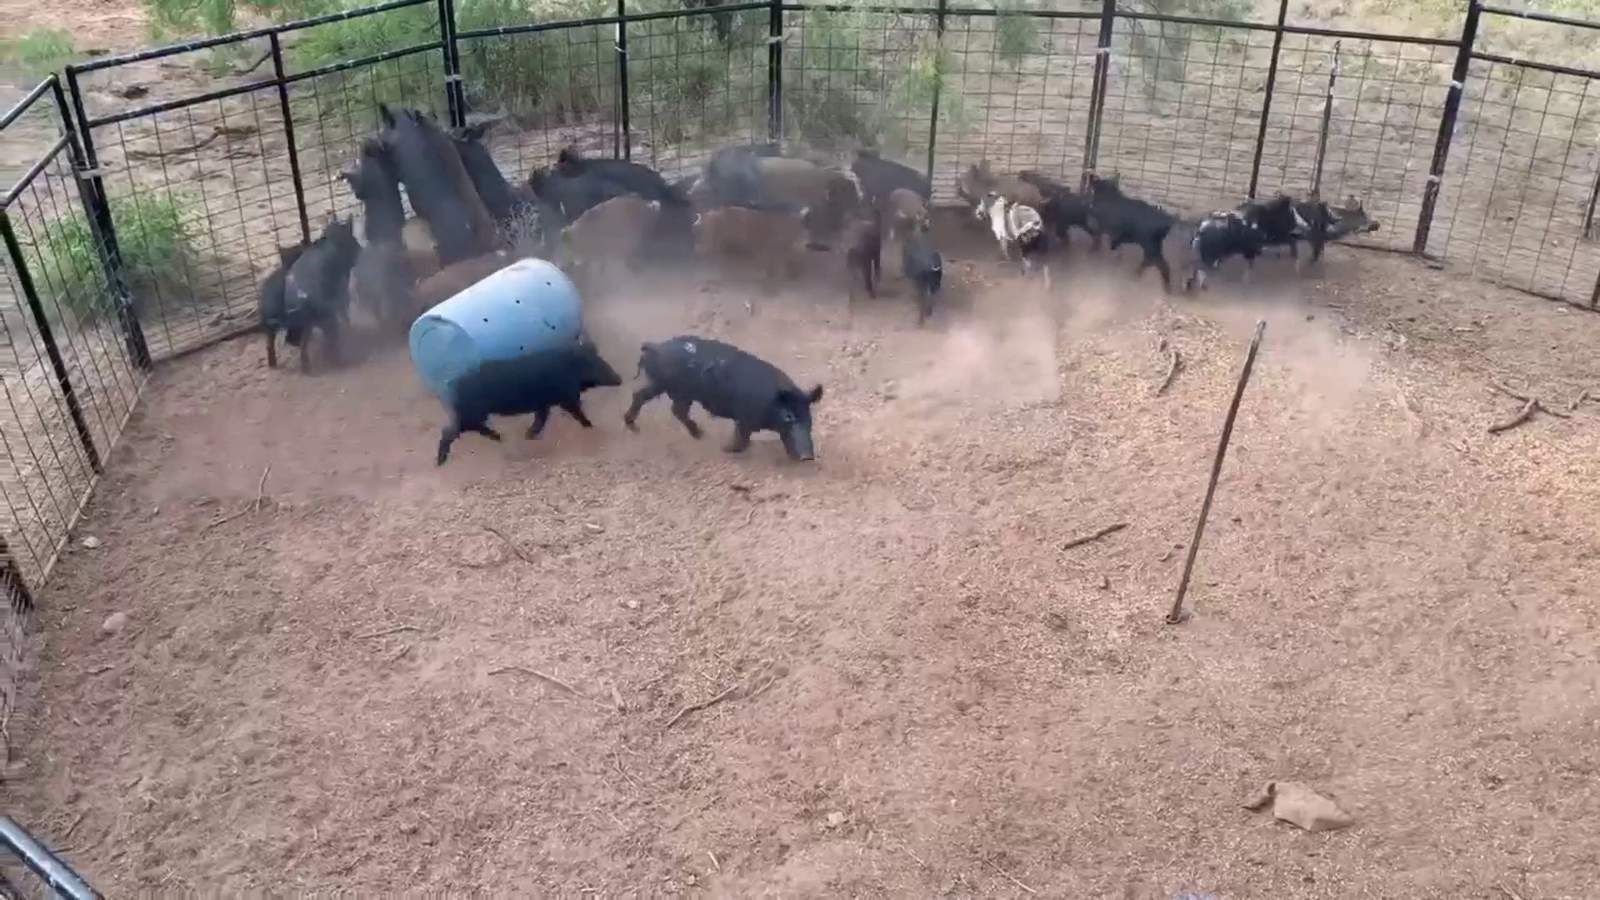 Texas trapper says he’s on track to trap 6,500+ hogs after ‘busy year’